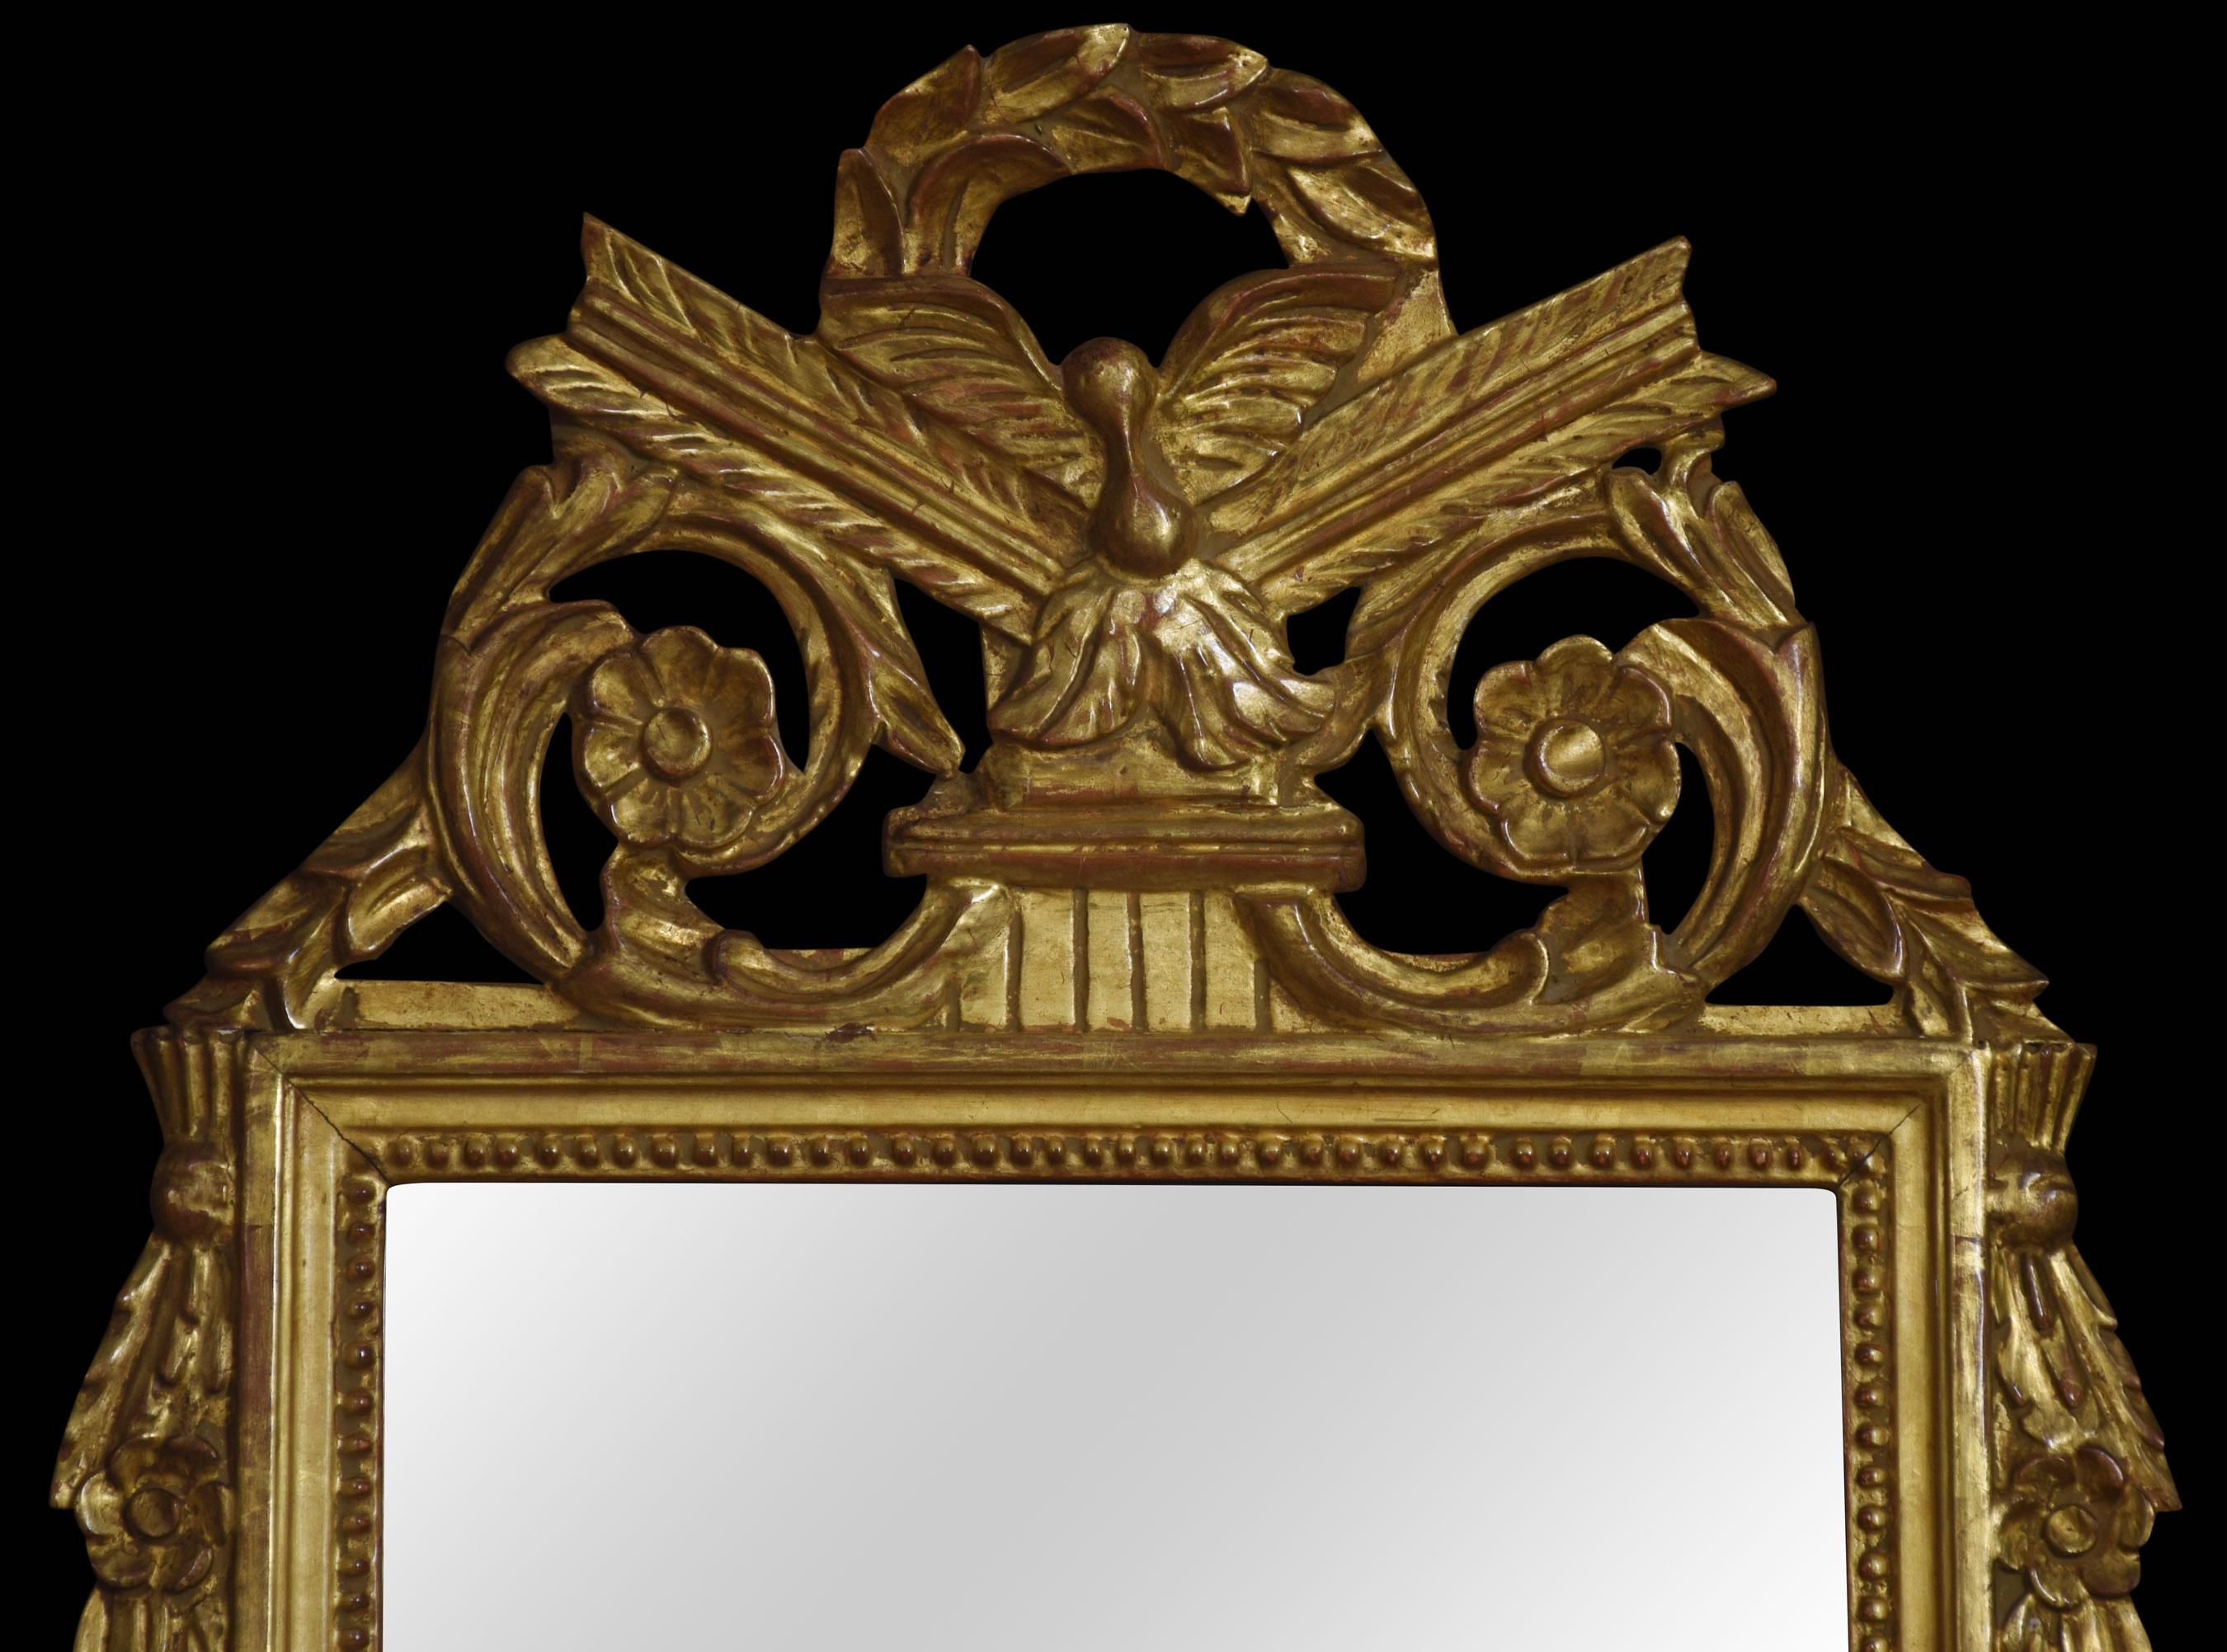 18th century style gilt framed wall mirror, the original mirror plate encased in a gilt frame with a classical laurel wreath, and floral cresting.
Dimensions
Height 38 inches
Width 22.5 inches
Depth 1.5 inches.